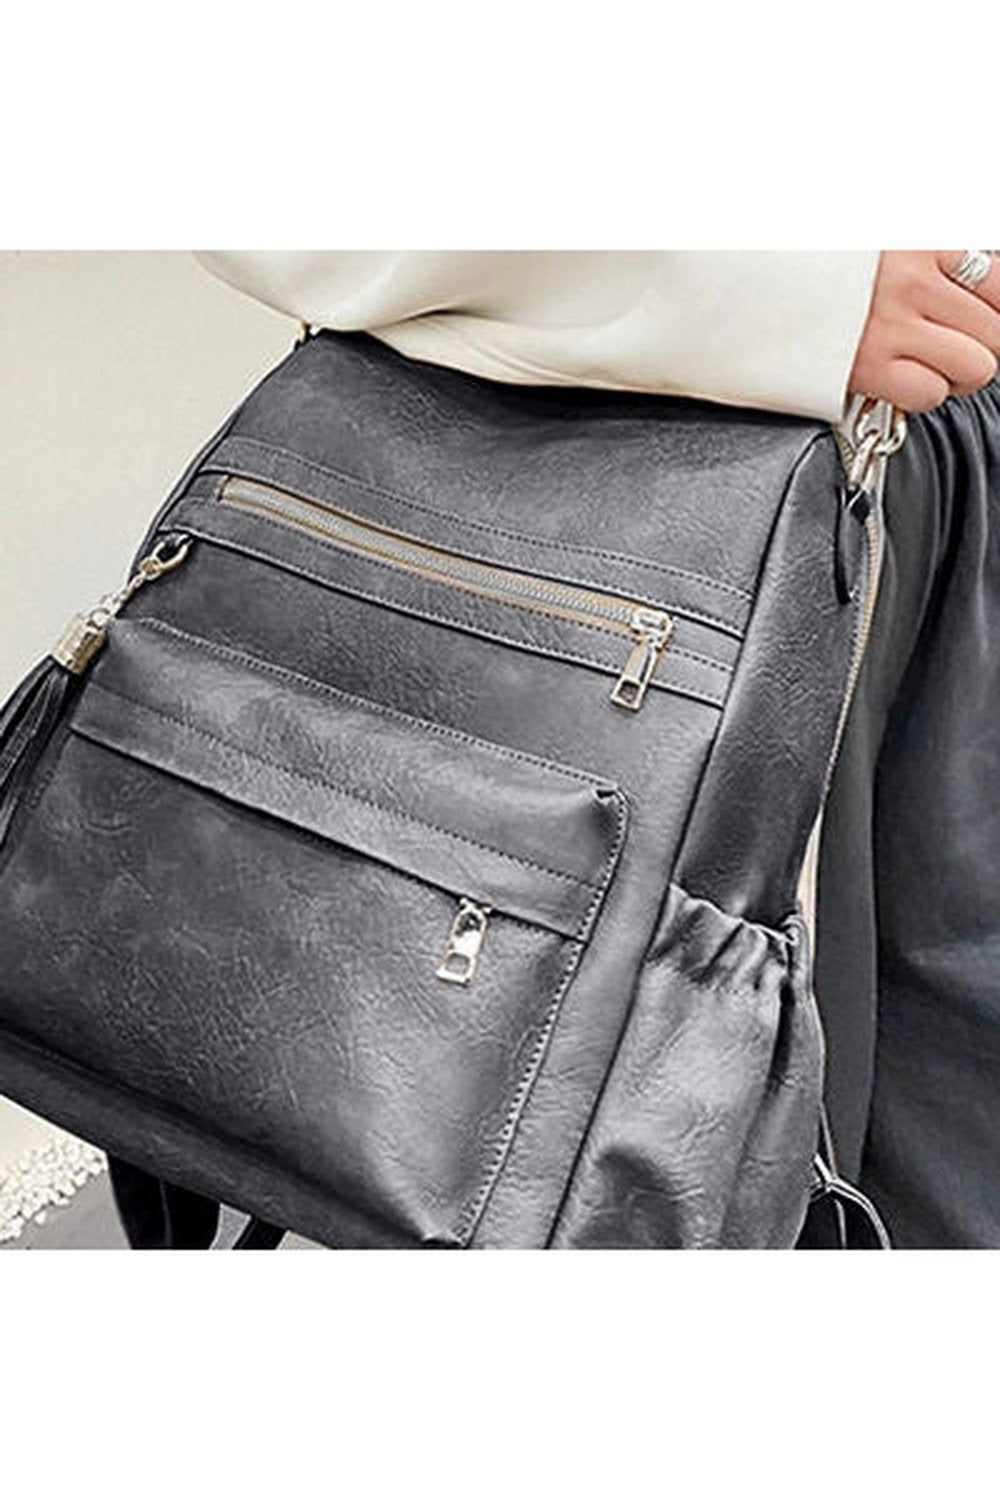 PU Leather Convertible Backpack - Handbag - FITGGINS